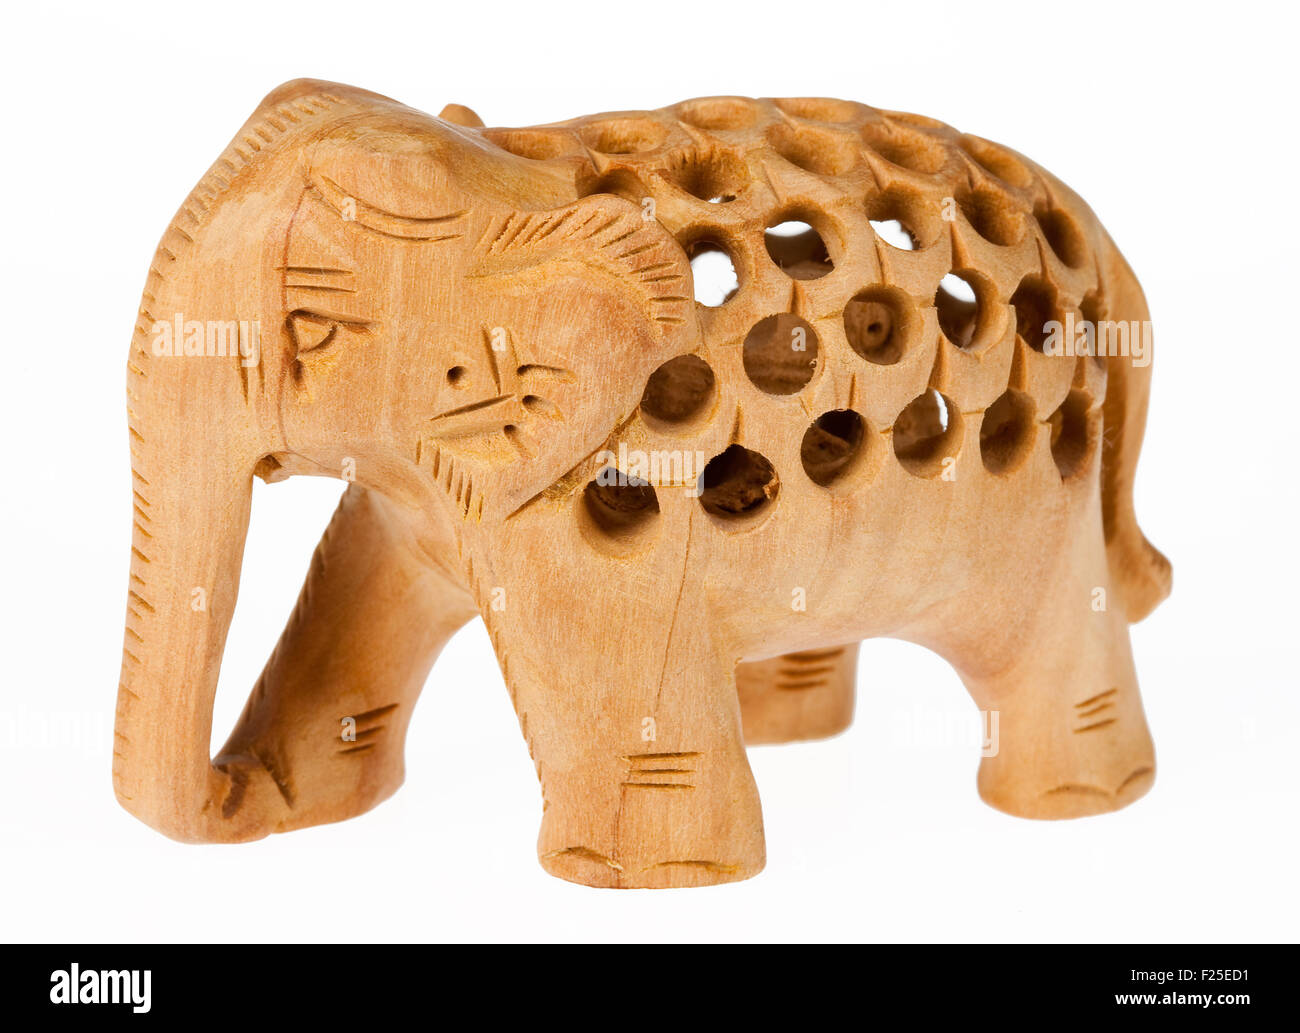 elephant animal statuette wood culture folk lifestyle art tradition traditional carving sculpture isolated object background Stock Photo